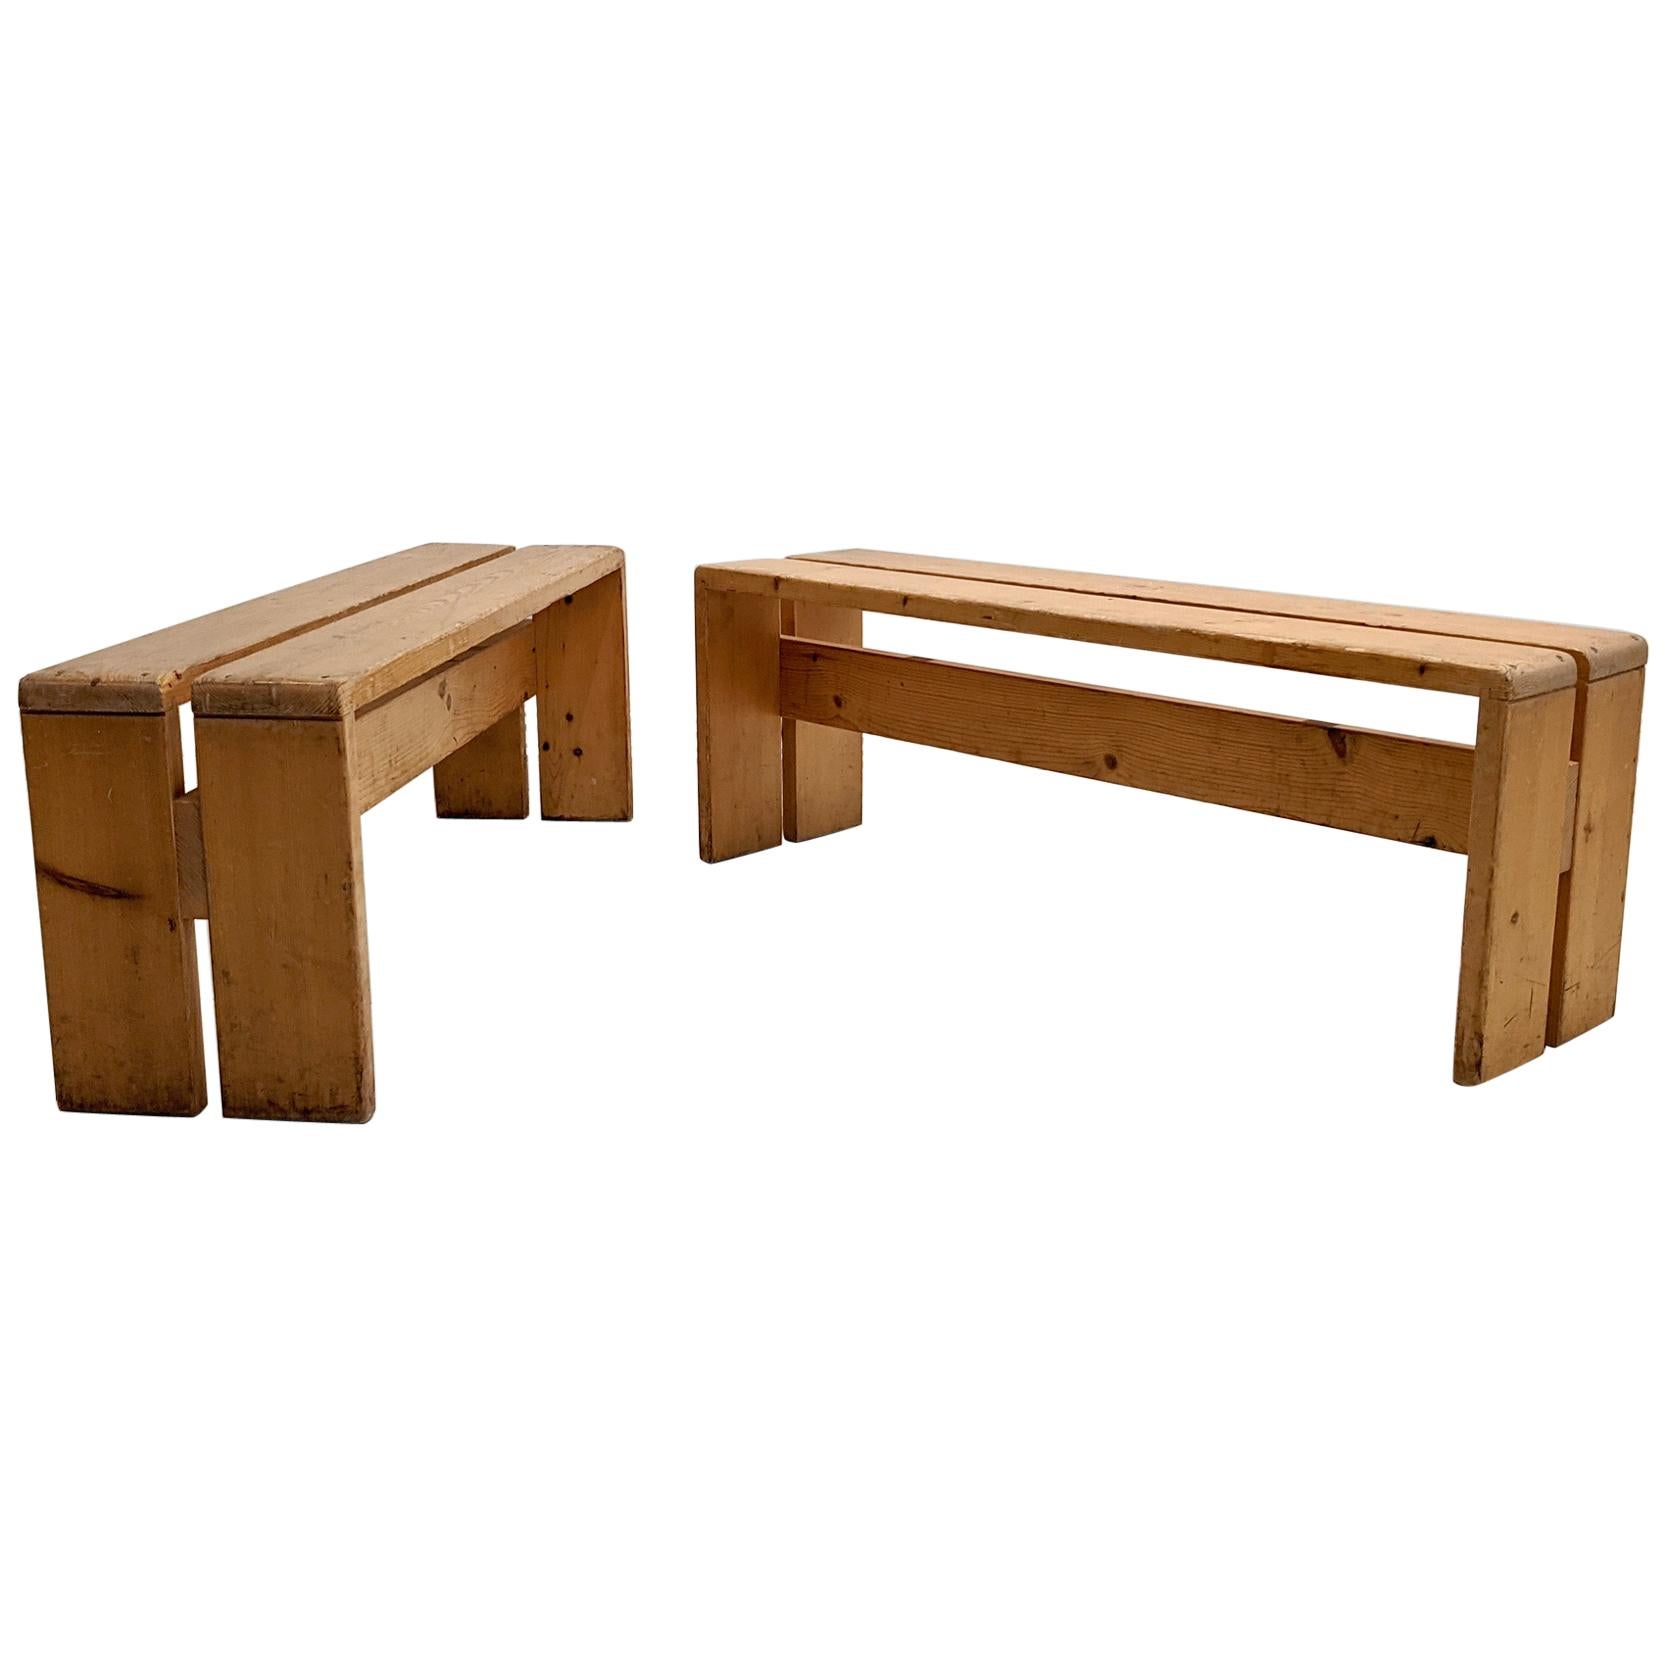 Set of 2 Benches by Charlotte Perriand for Les Arcs For Sale